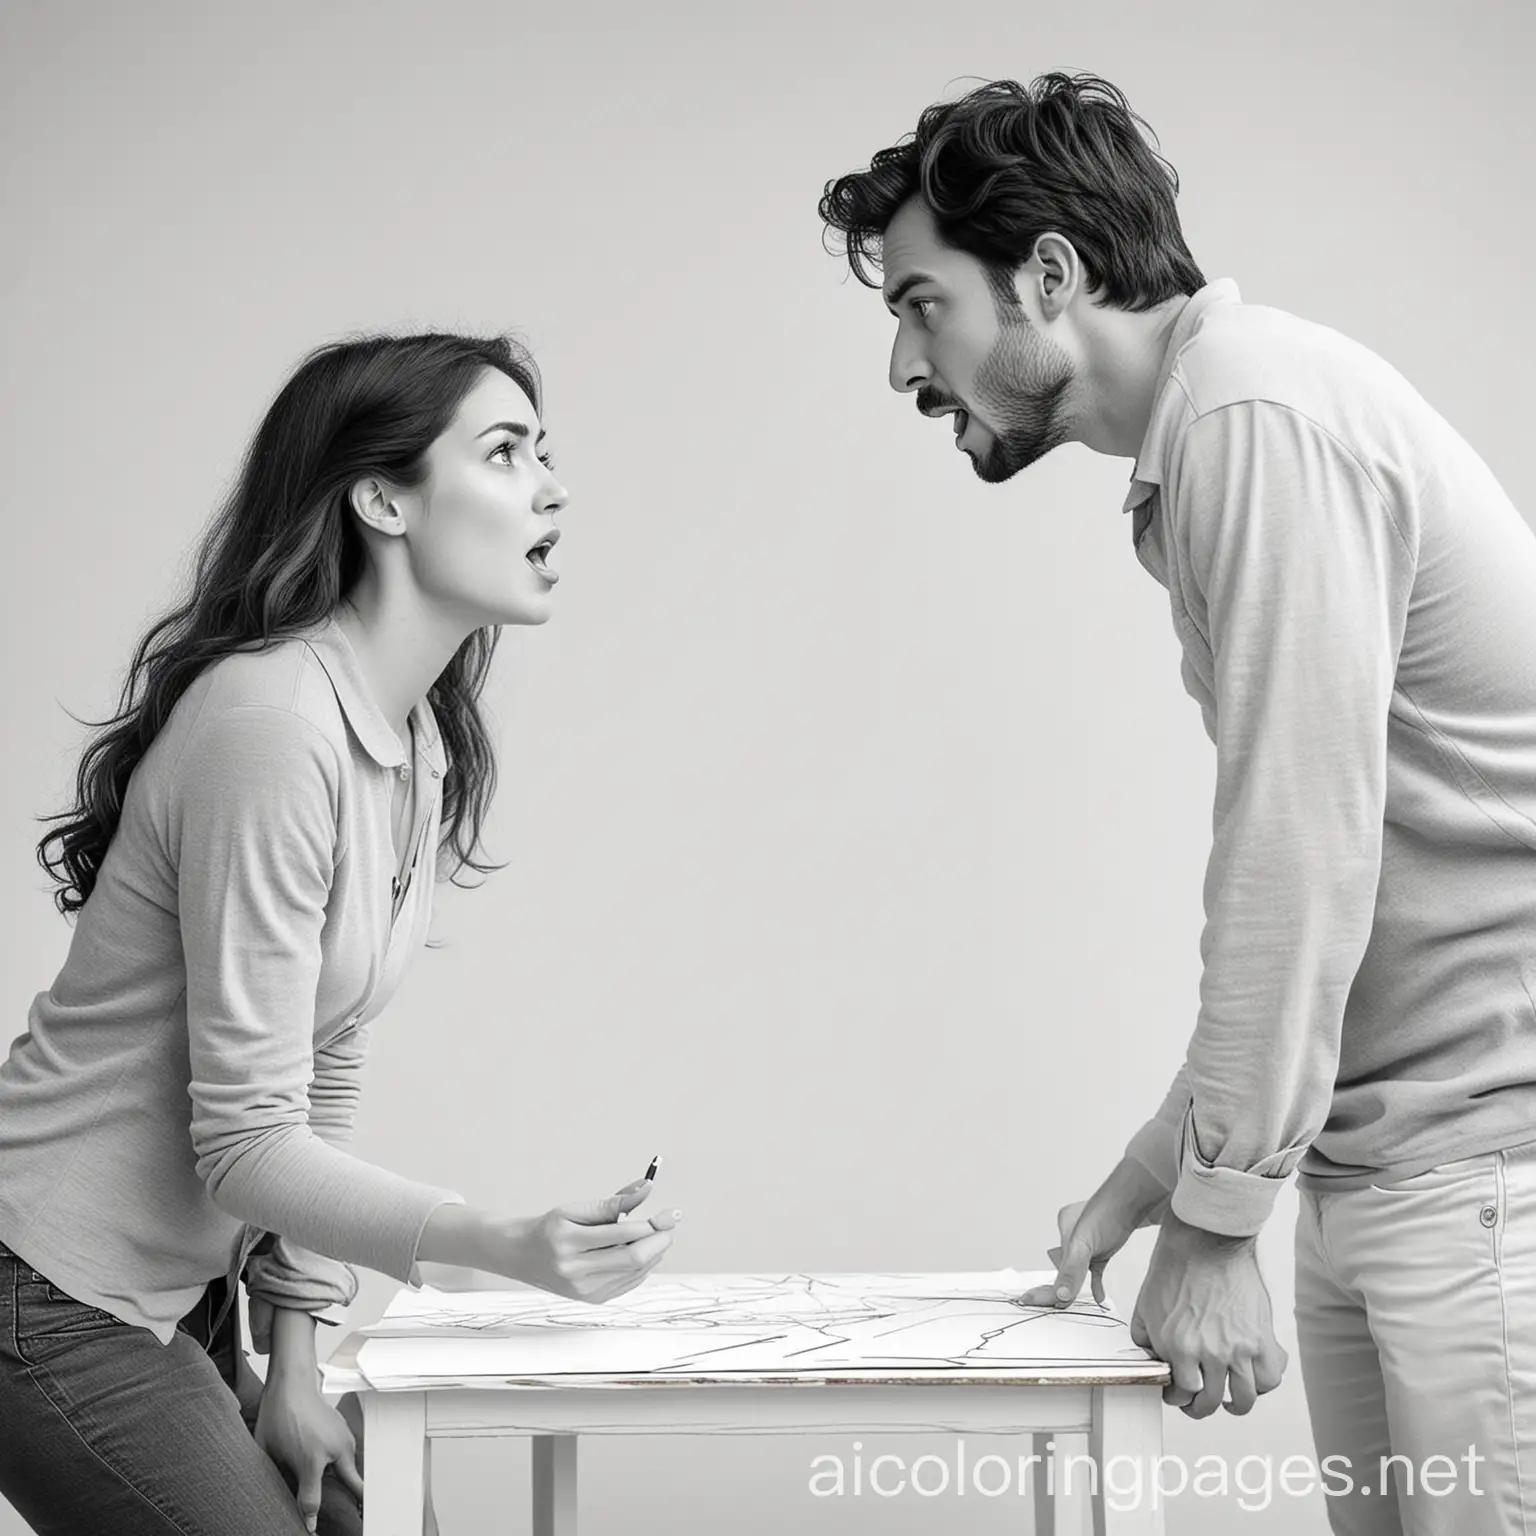 a man blaming a woman in an argument, Coloring Page, black and white, line art, white background, Simplicity, Ample White Space